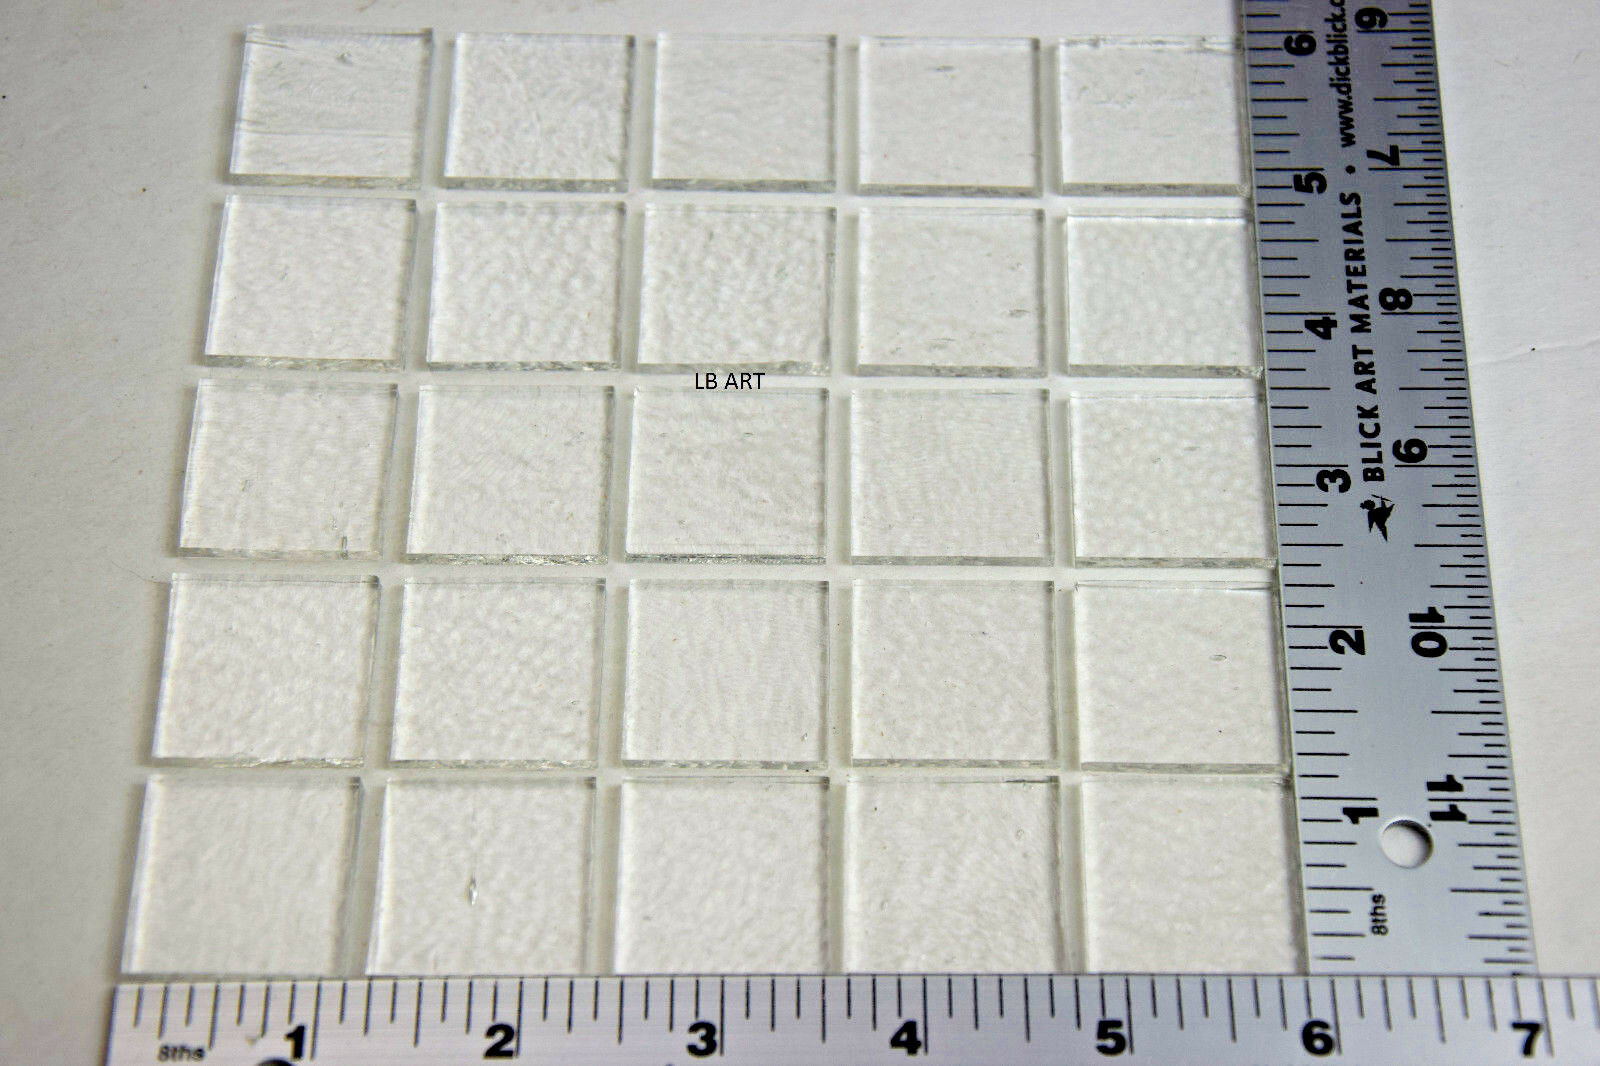 1101.30 - 25 Clear 1"x1" Squares Bullseye 3mm Fusing Glass Caps / Toppers 90 Coe